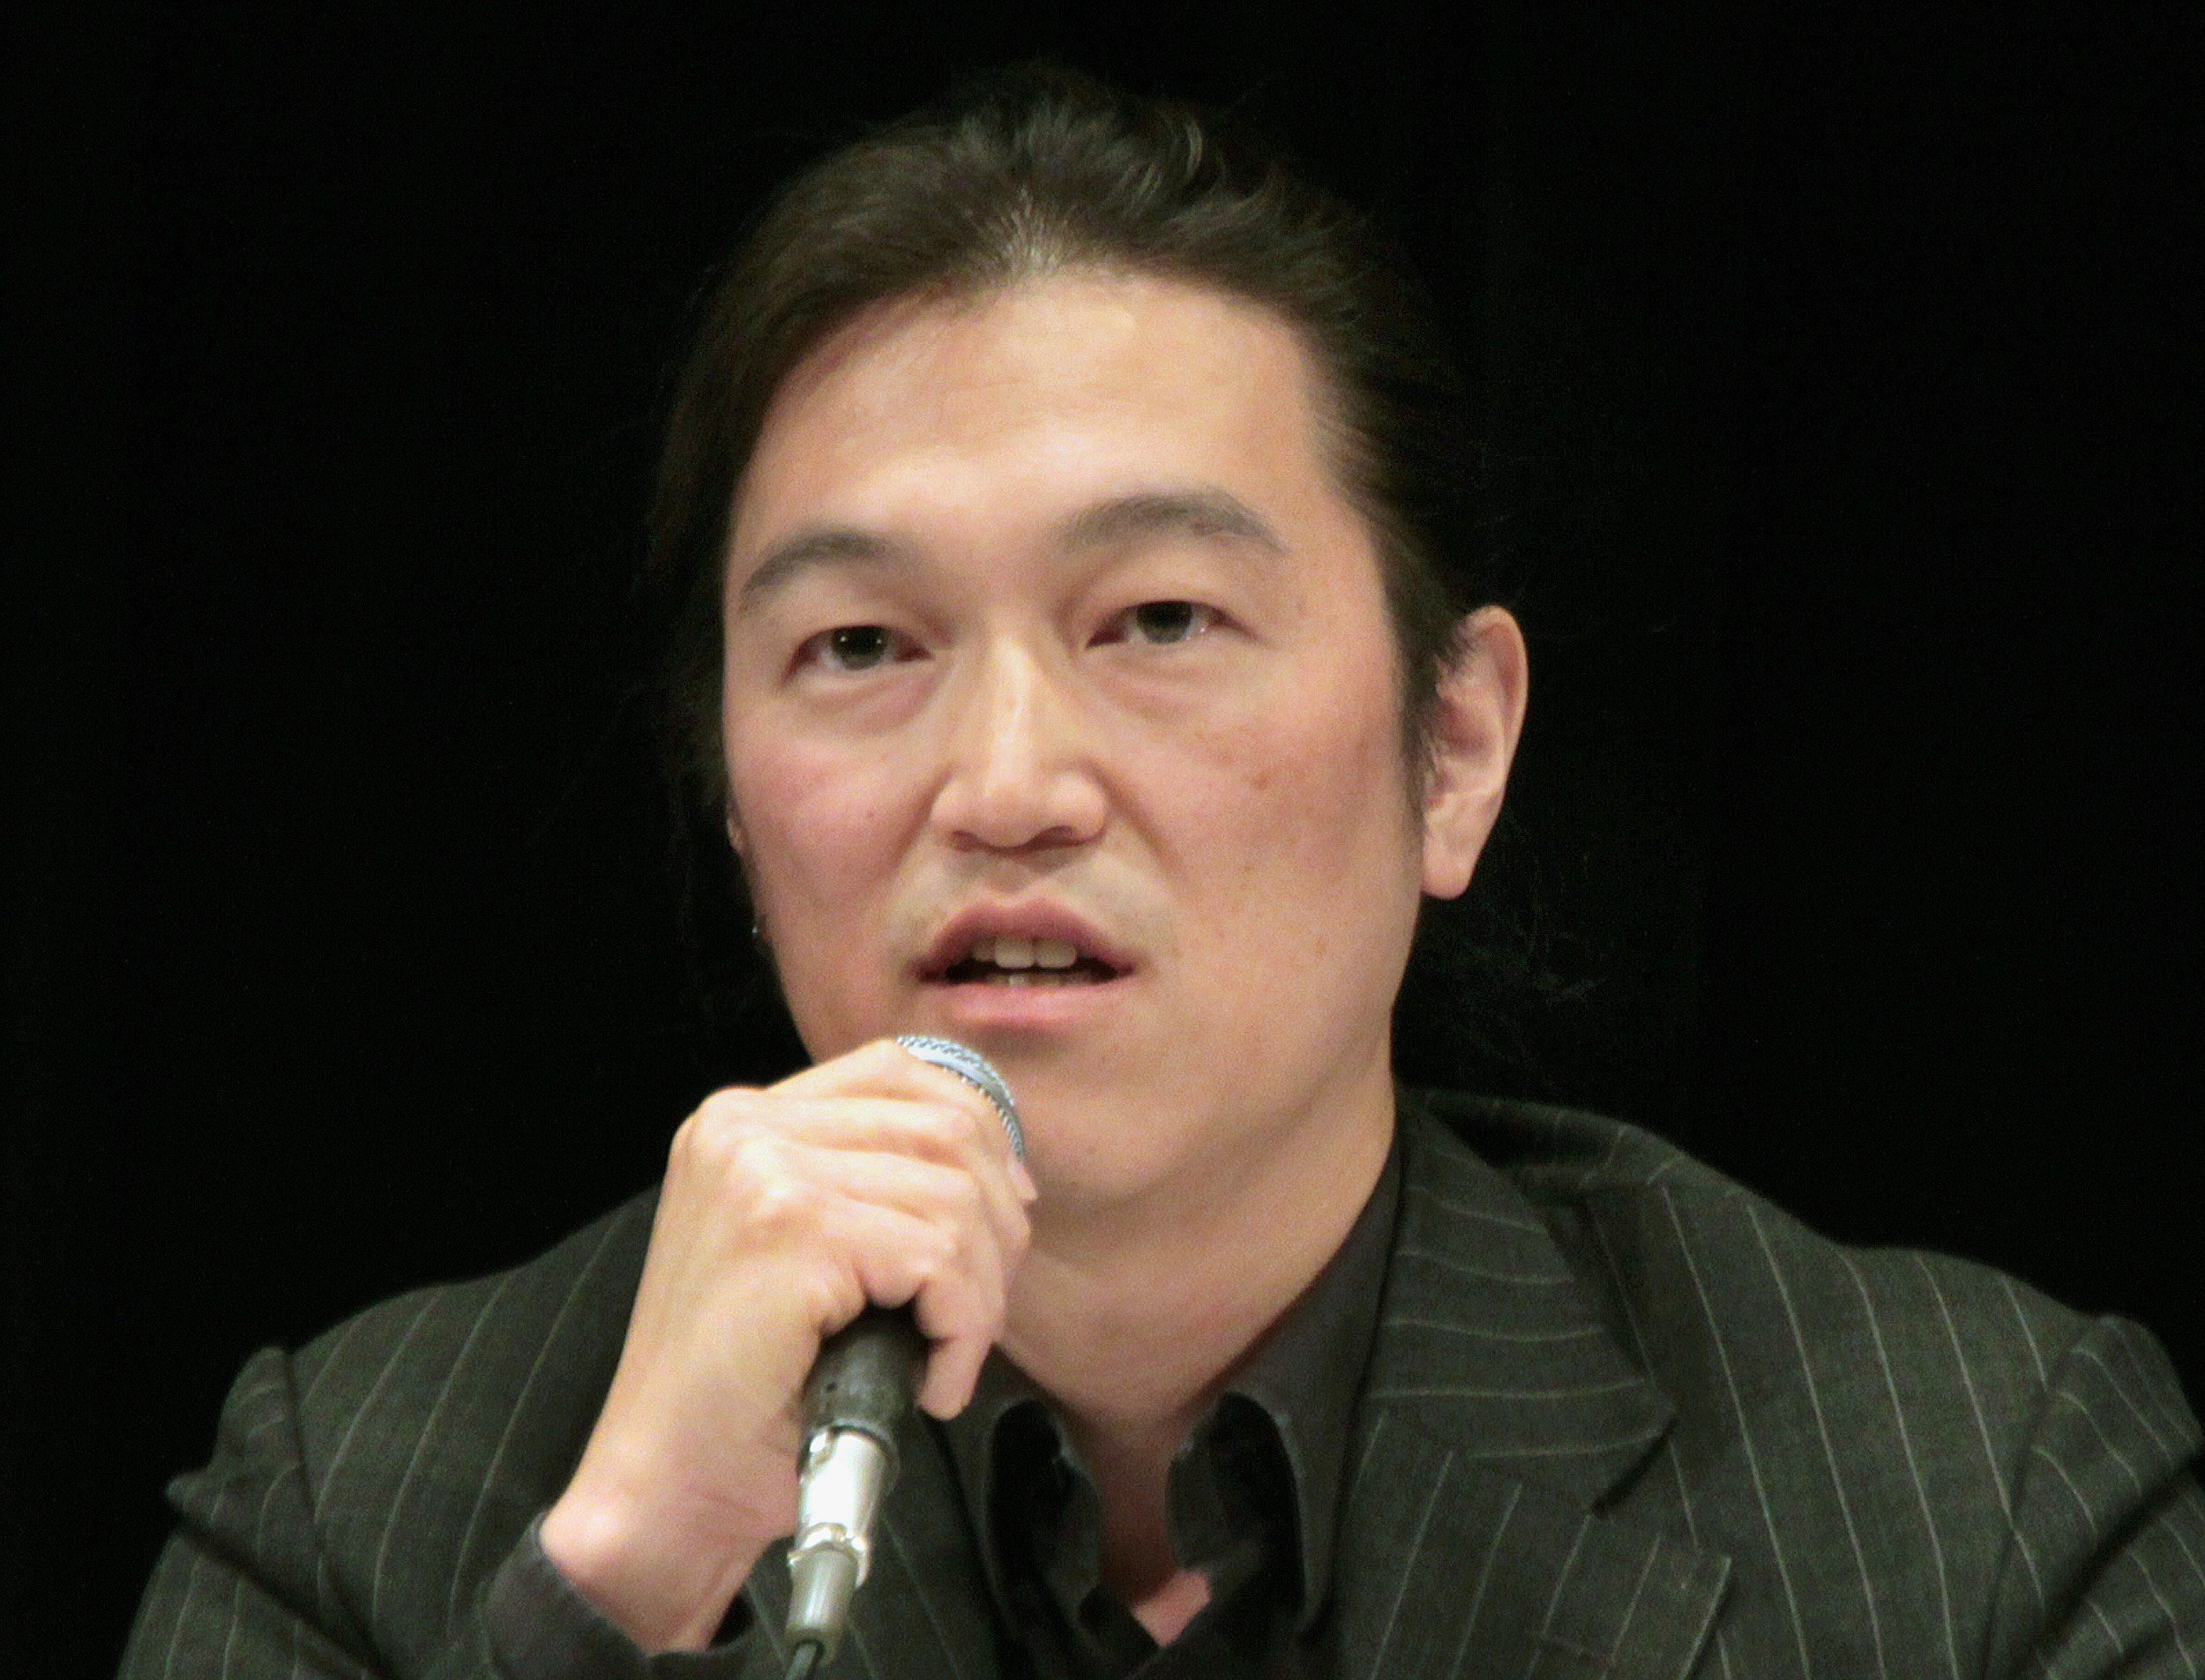 Japanese journalist Kenji Goto delivering a lecture during a symposium in Tokyo on Oct. 27, 2010.